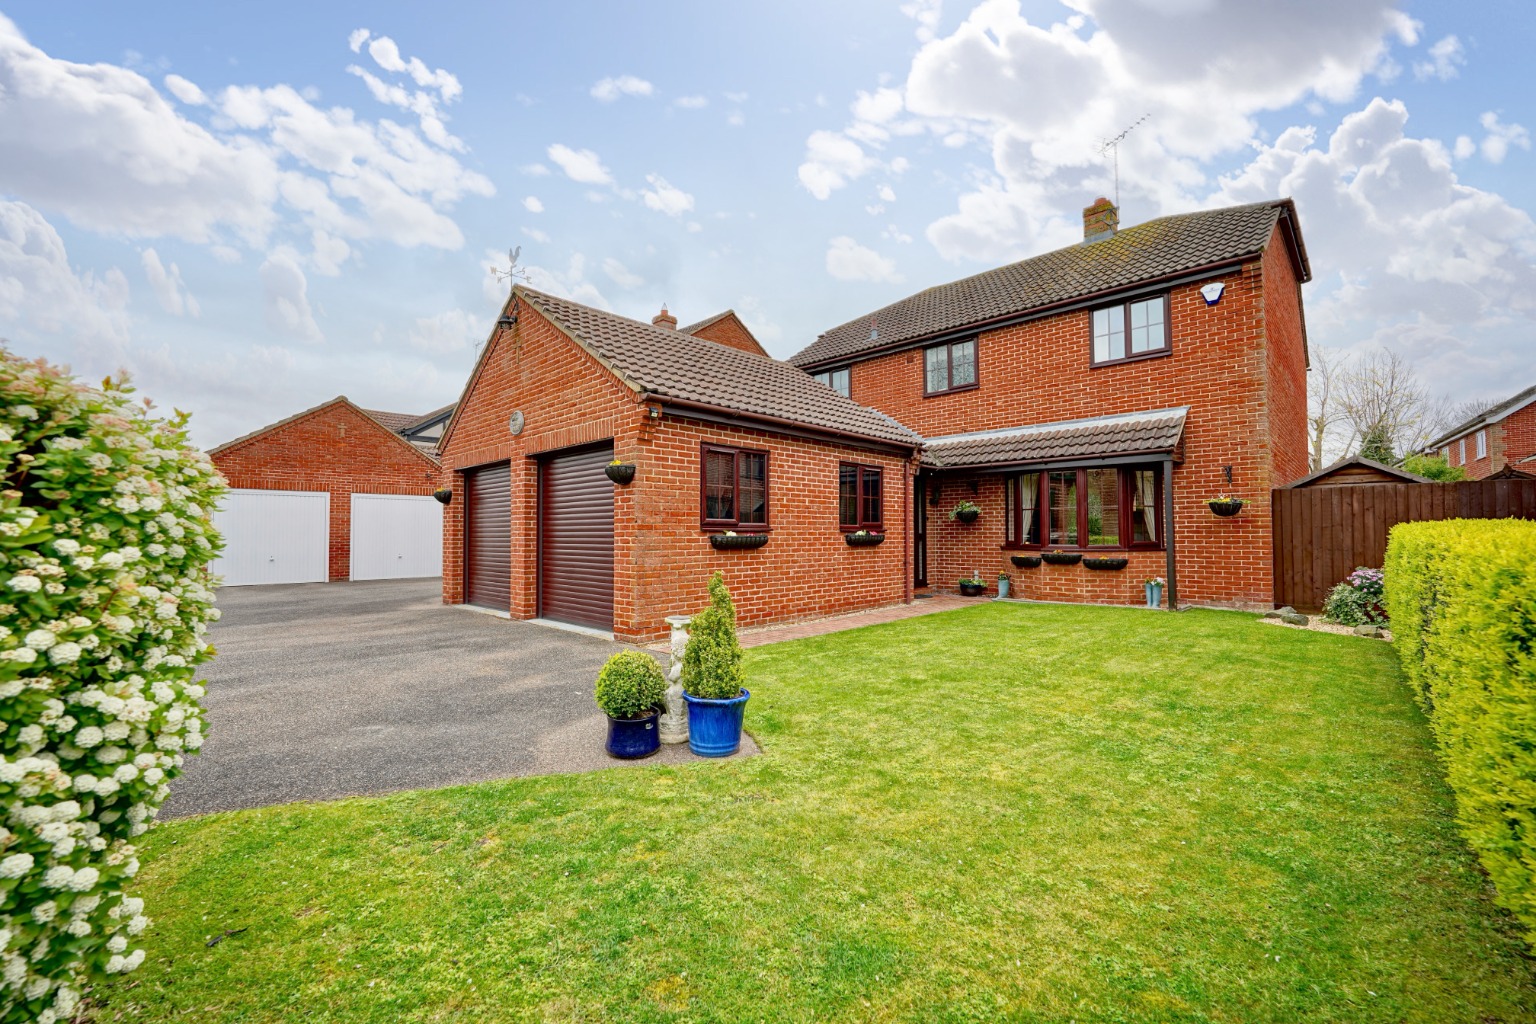 4 bed detached house for sale in Pathfinder Way, Huntingdon  - Property Image 1